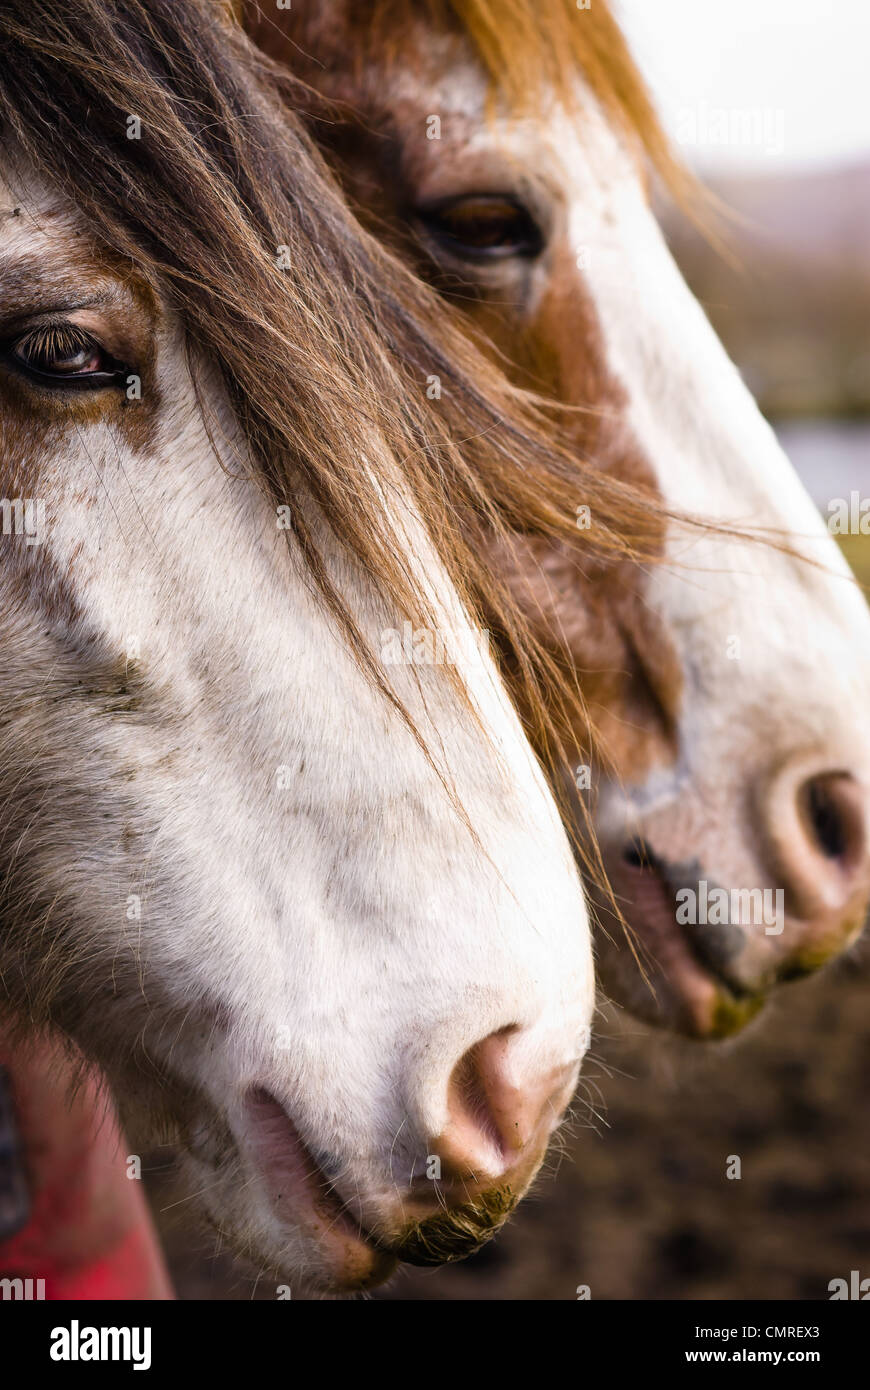 A pair of Clydesdale horses Stock Photo